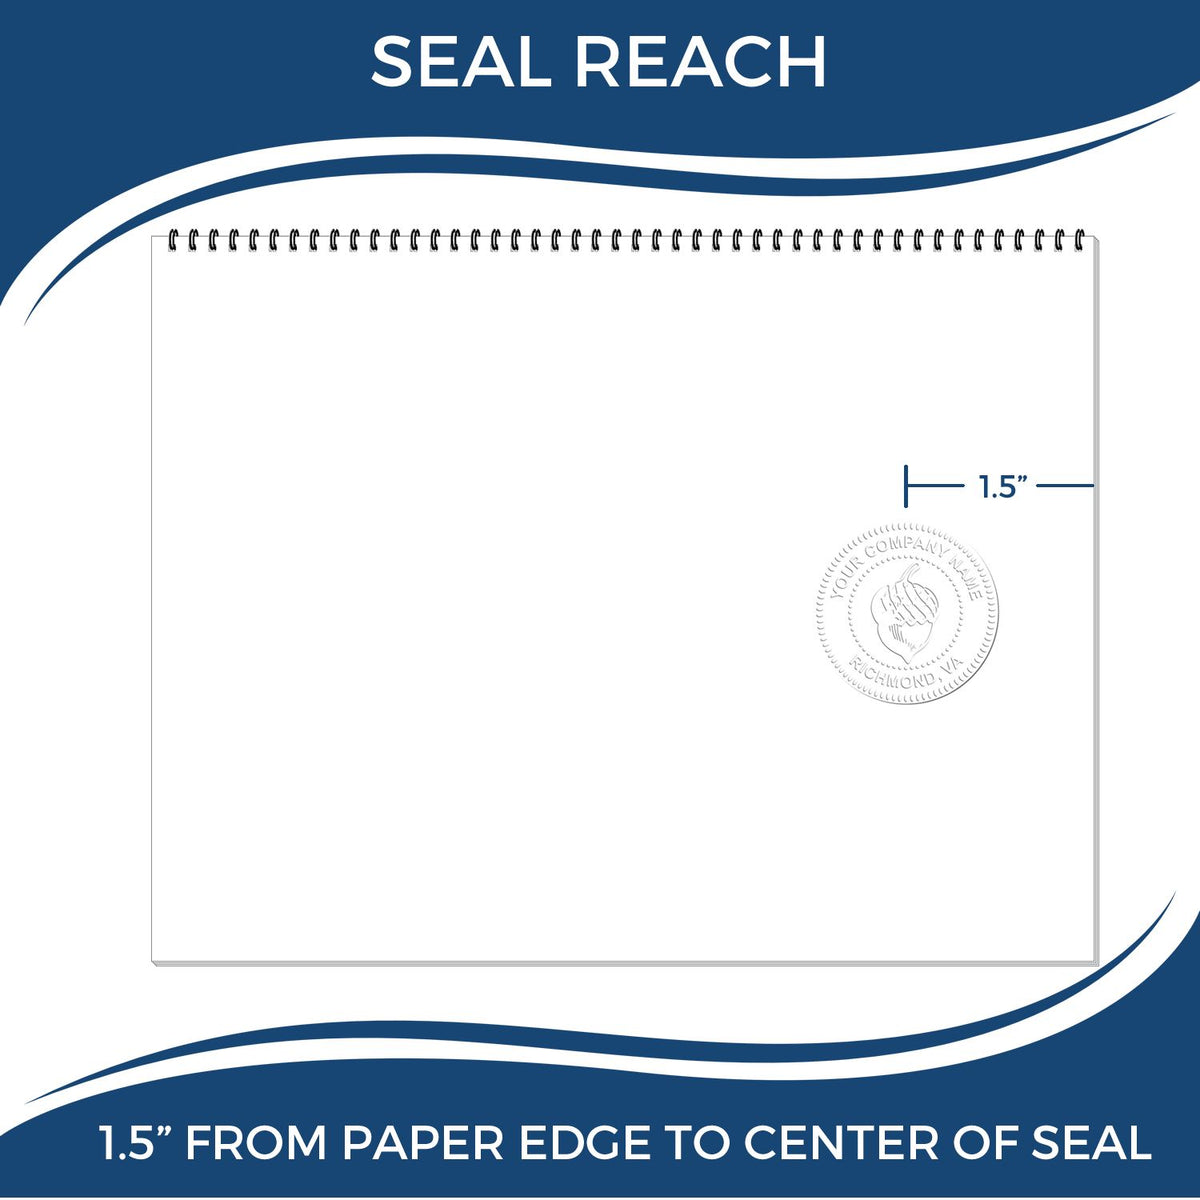 An infographic showing the seal reach which is represented by a ruler and a miniature seal image of the Handheld Kentucky Professional Engineer Embosser